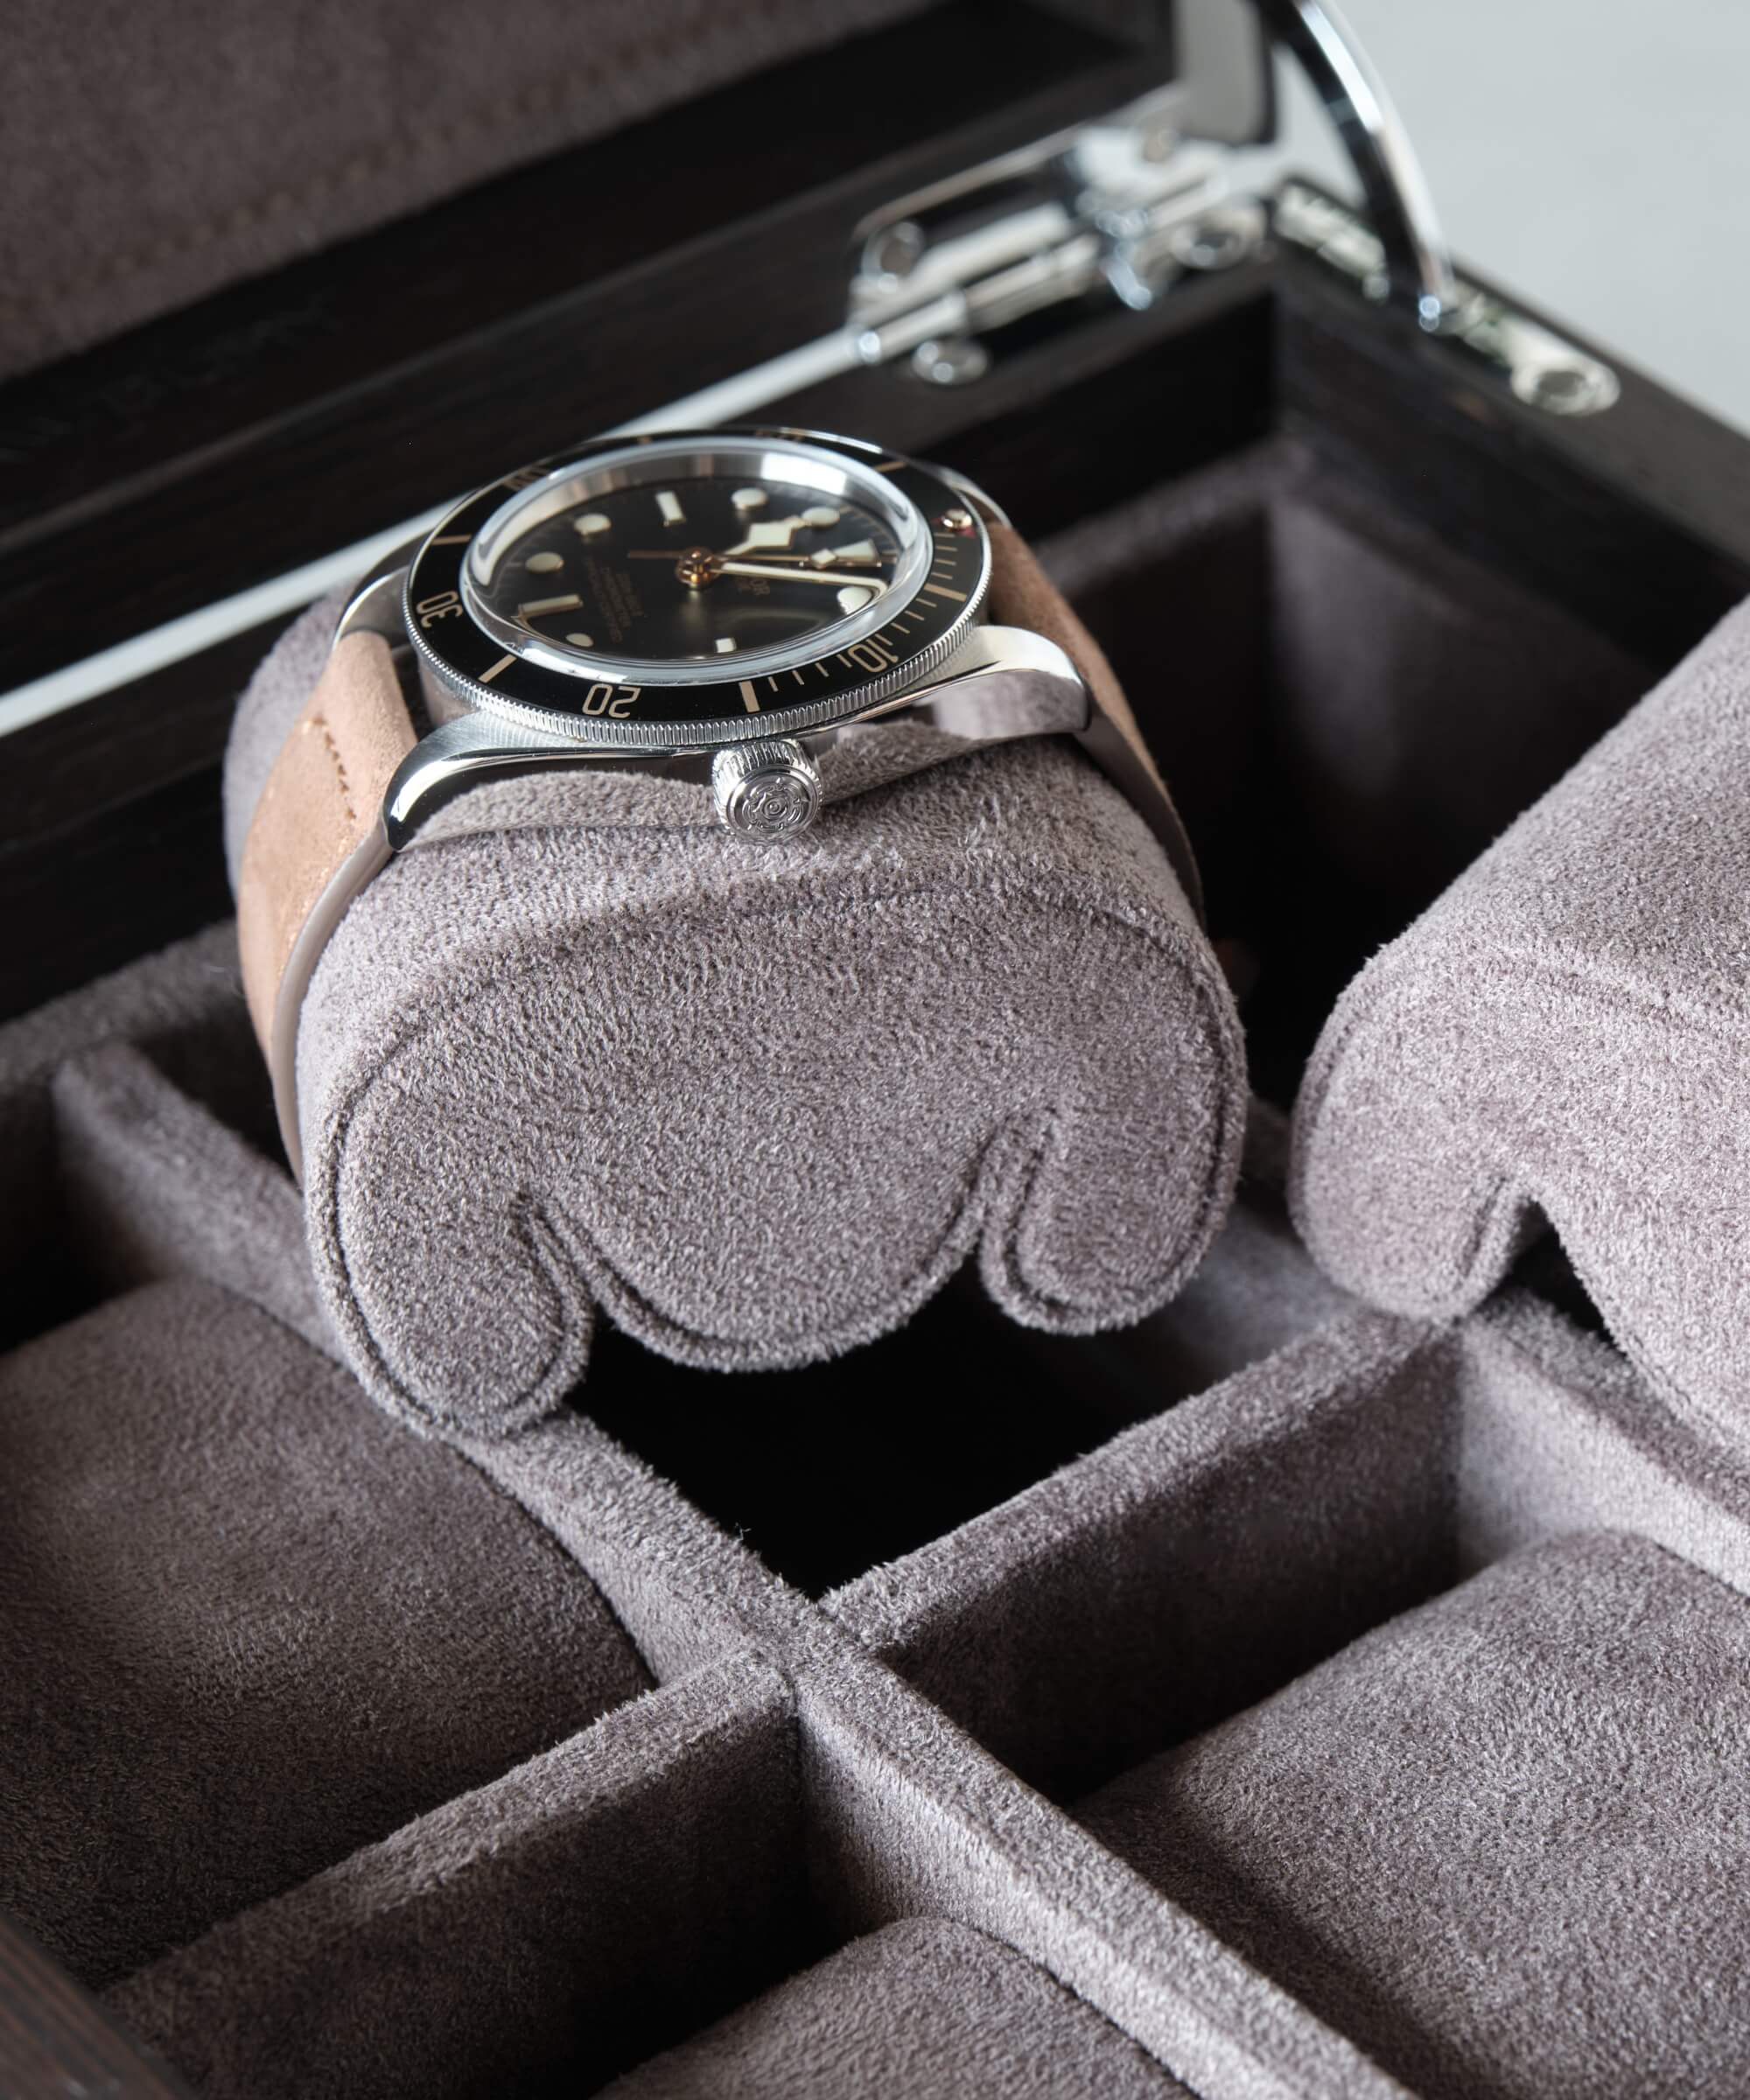 The TAWBURY Grove 6 Slot Watch Box with Solid Lid - Kassod is essential for any watch collection. Its sleek design perfectly showcases the stunning TAWBURY Tudor Black Bay timepieces.